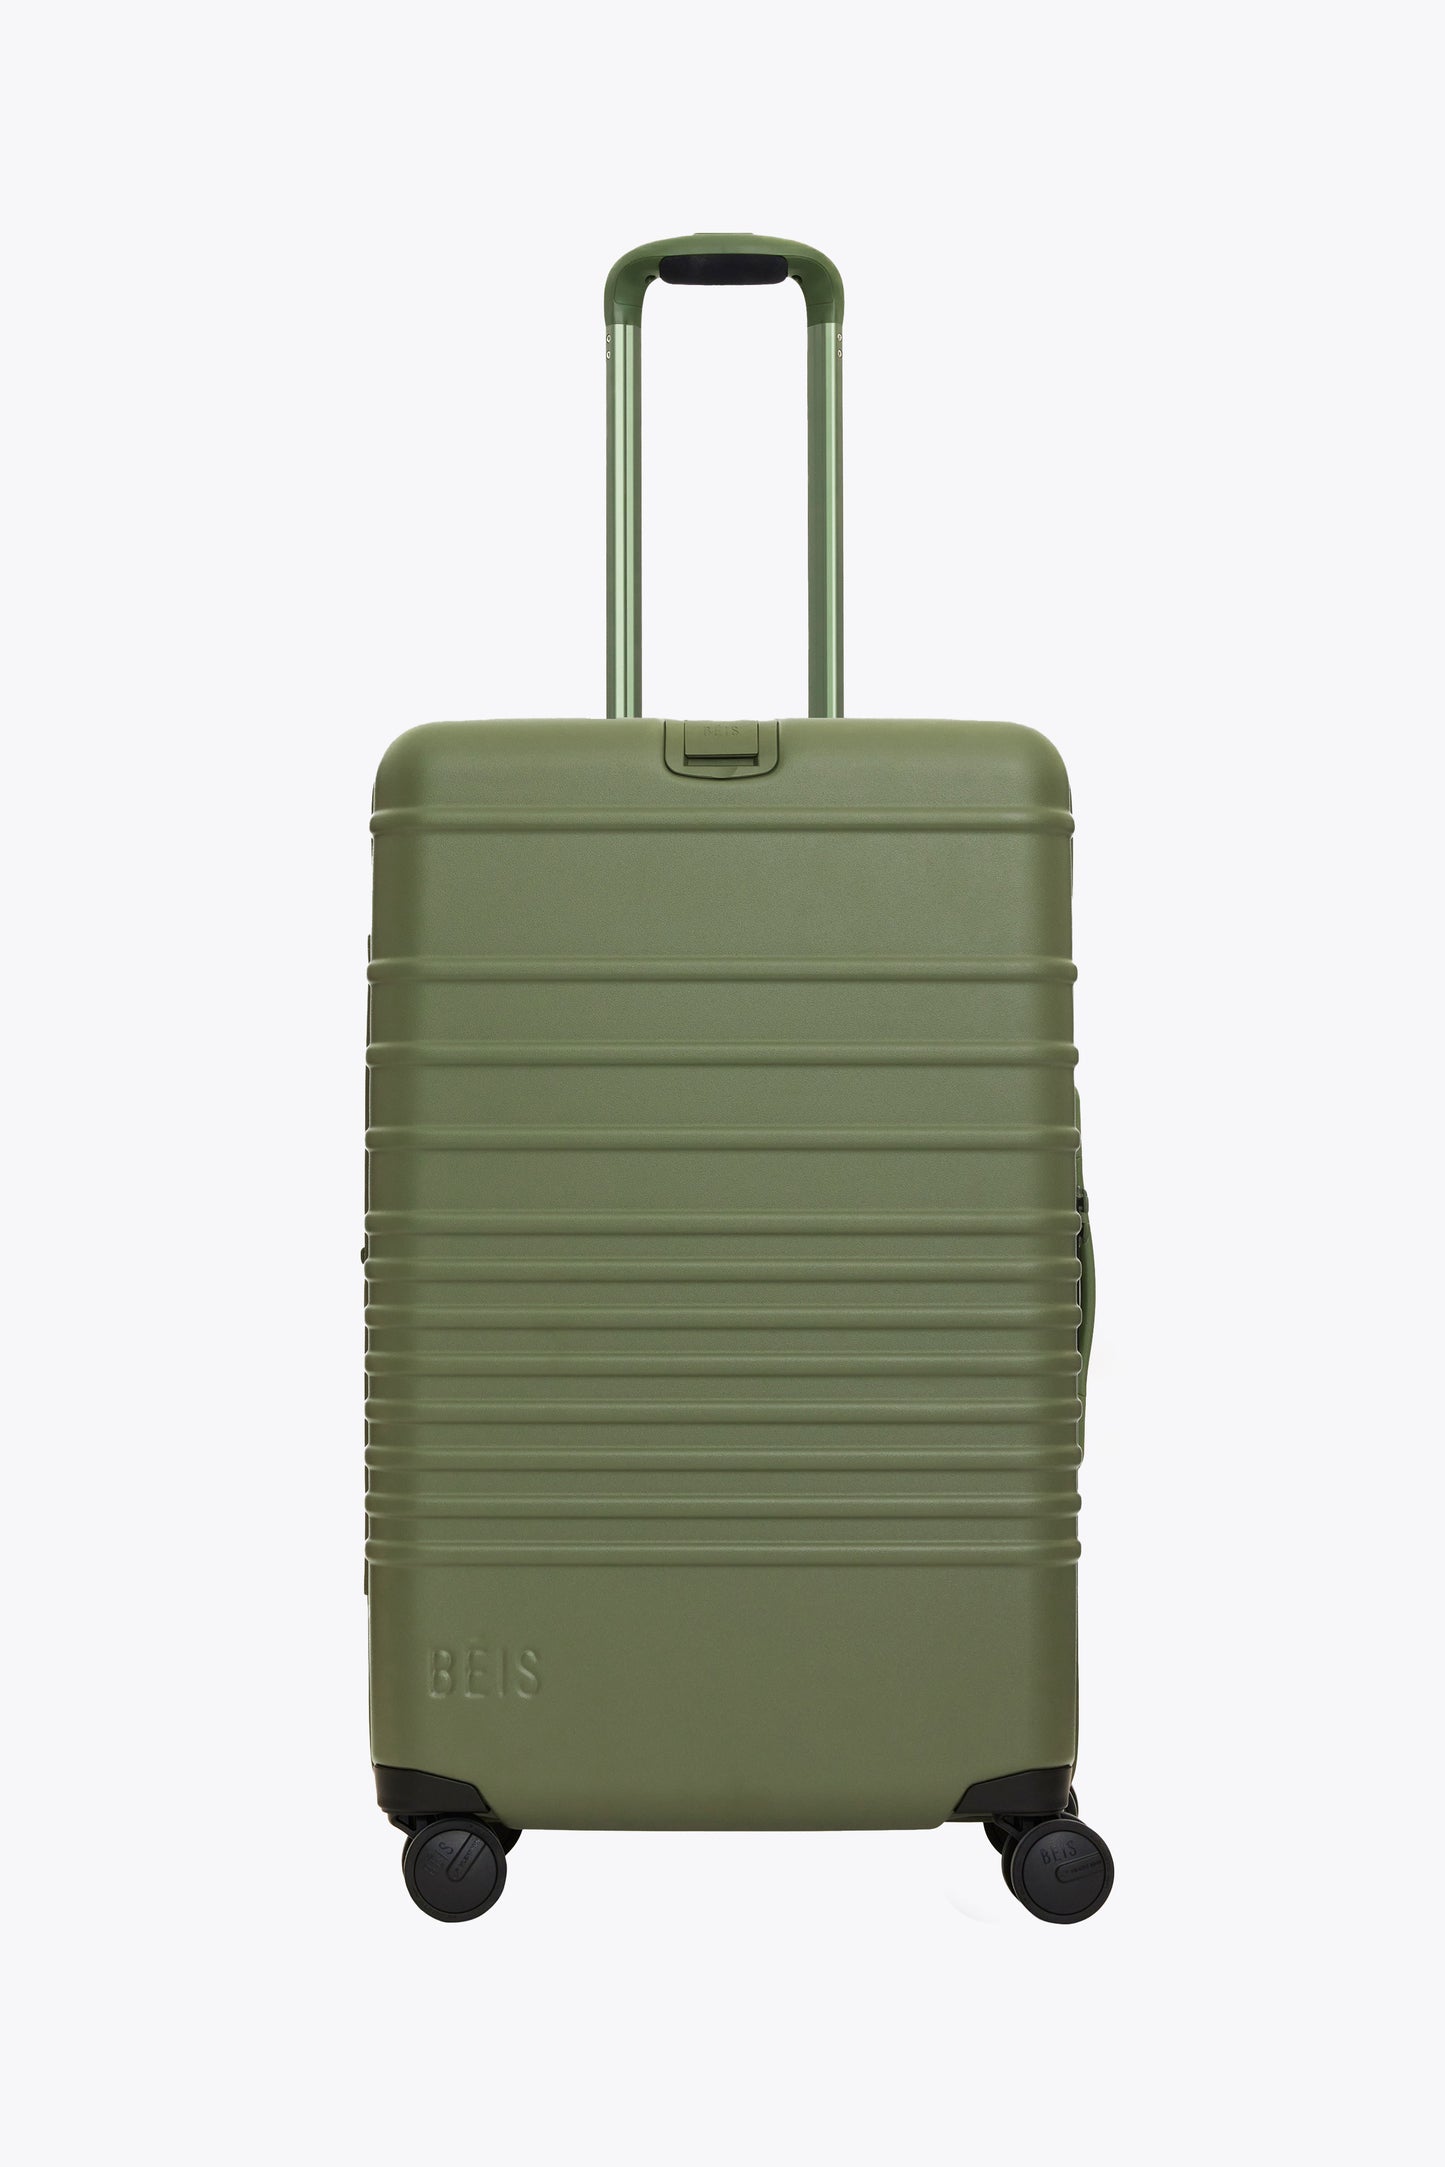 The Medium Check-In Roller in Olive